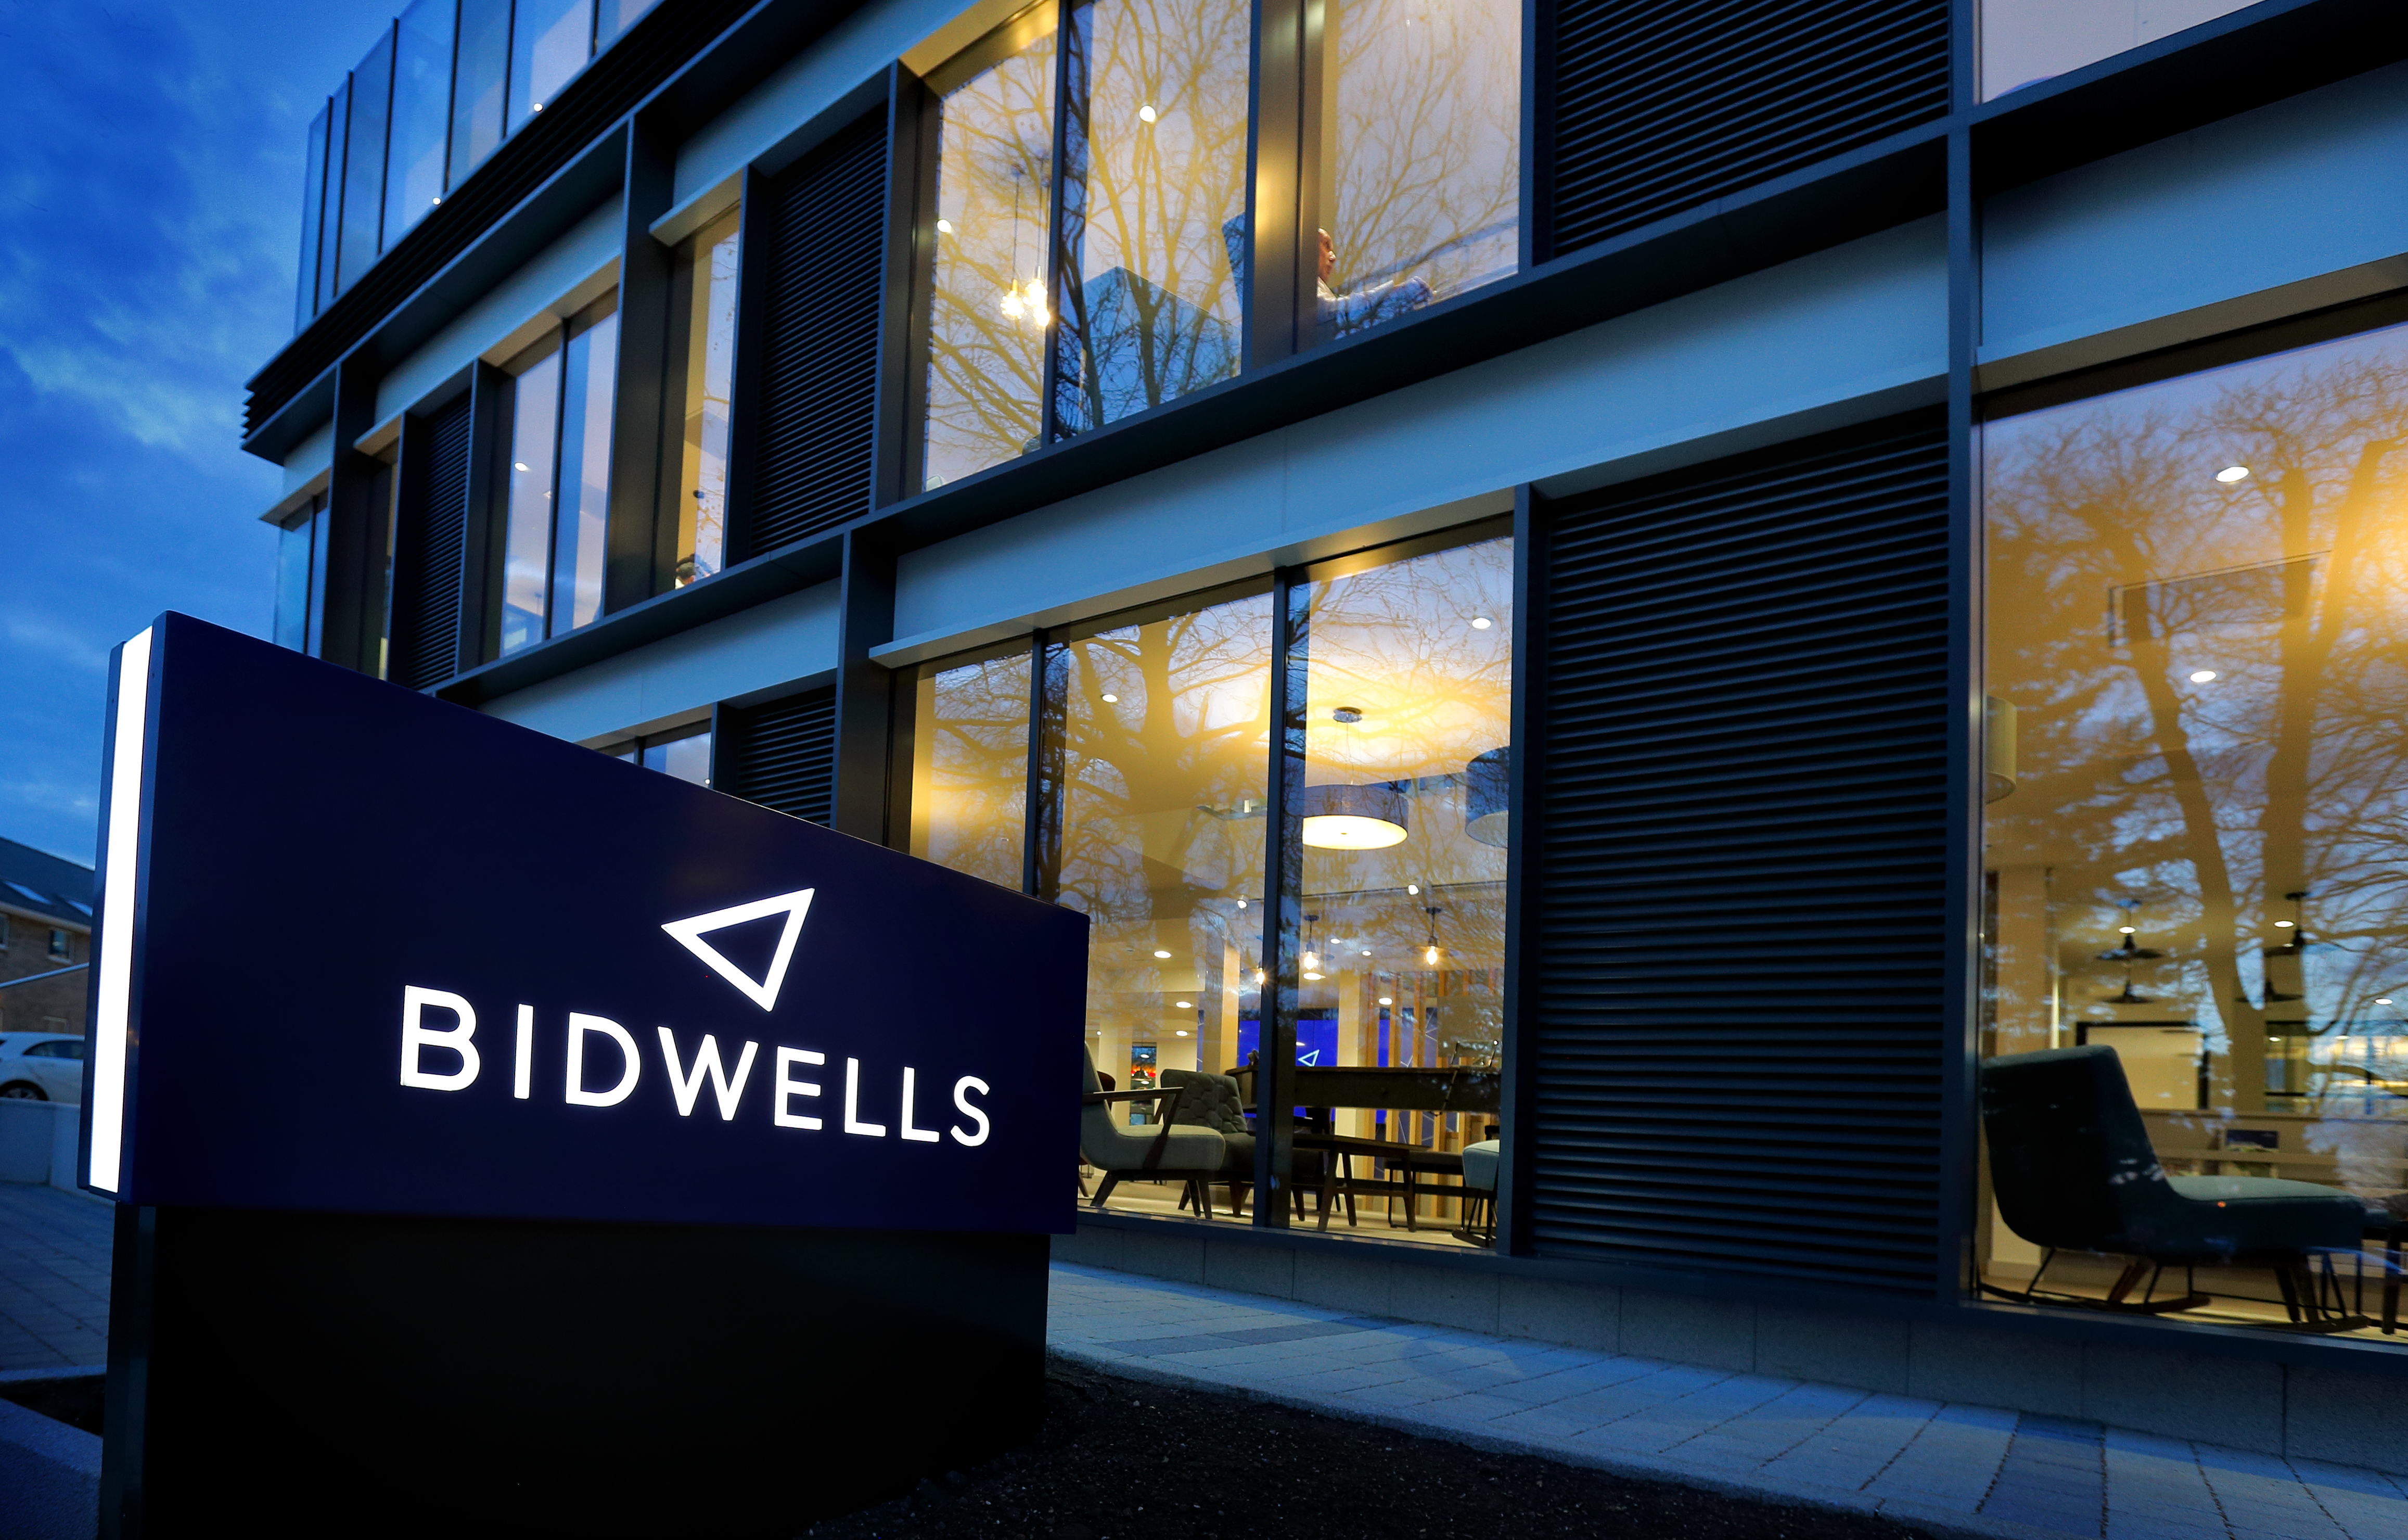 New COO set to steer Bidwells through ‘most transformative decade yet’